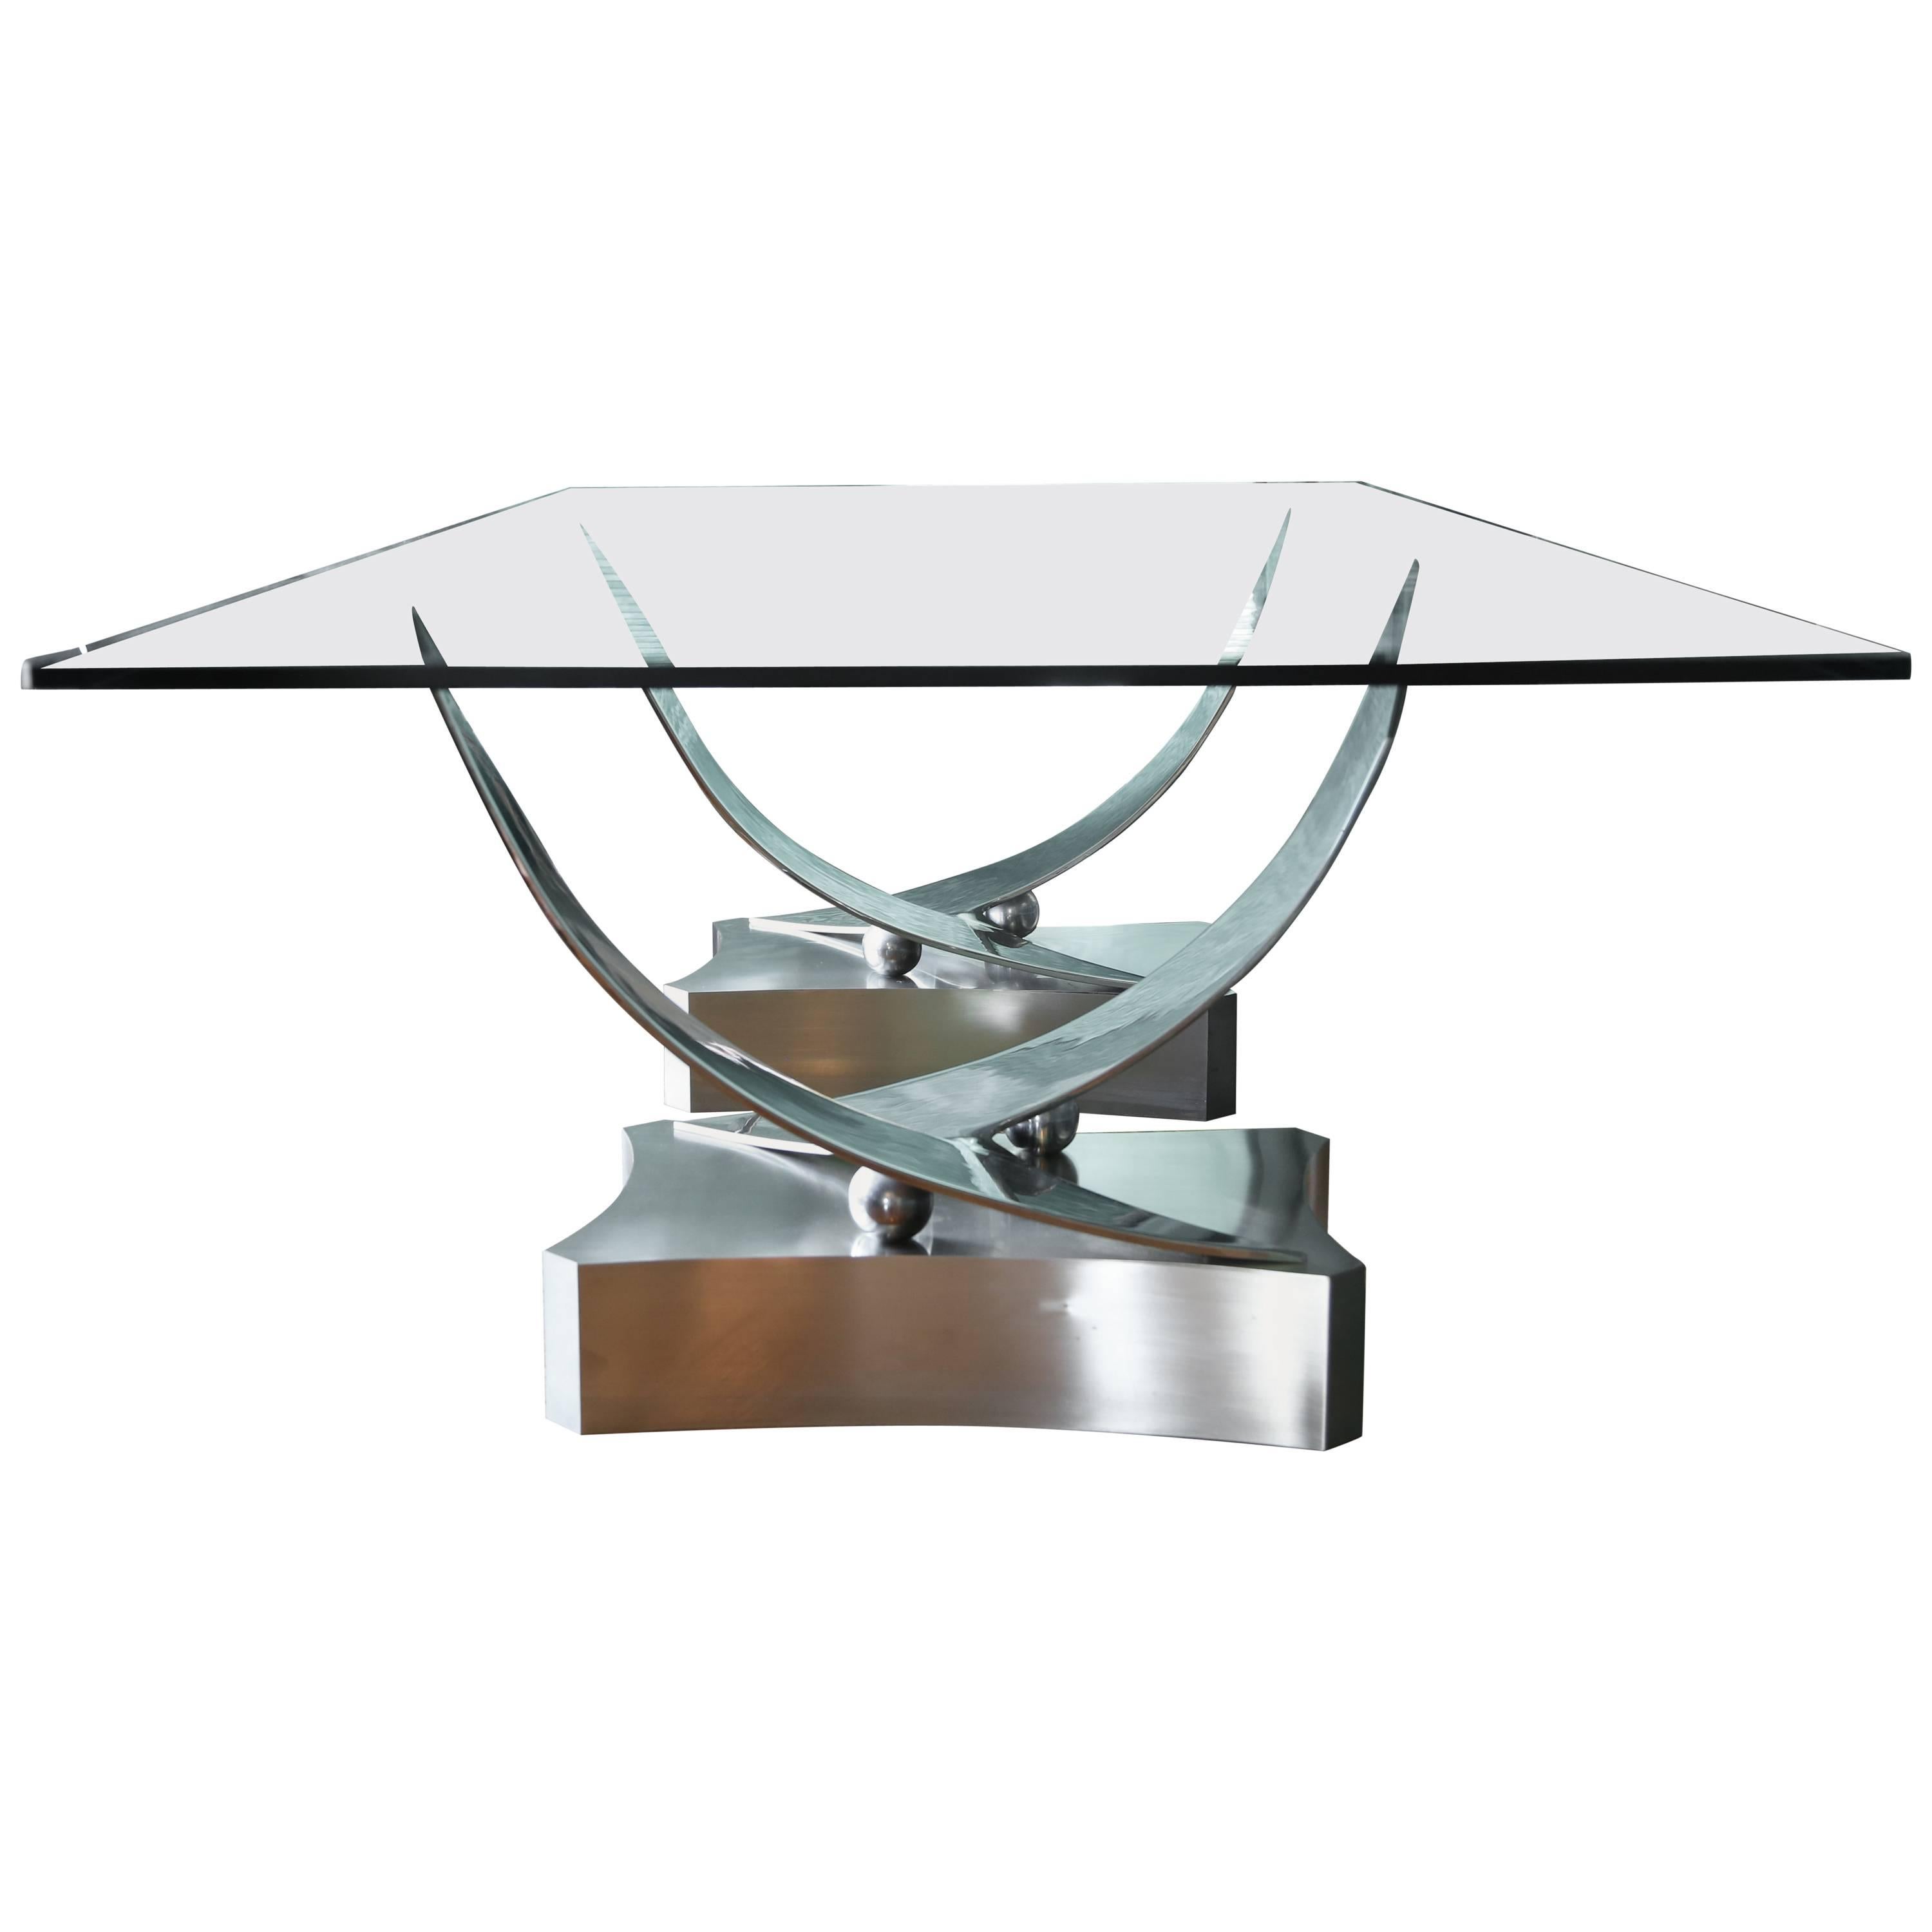 Ron Seff "Coronet" Stainless Steel and Glass Dining Table